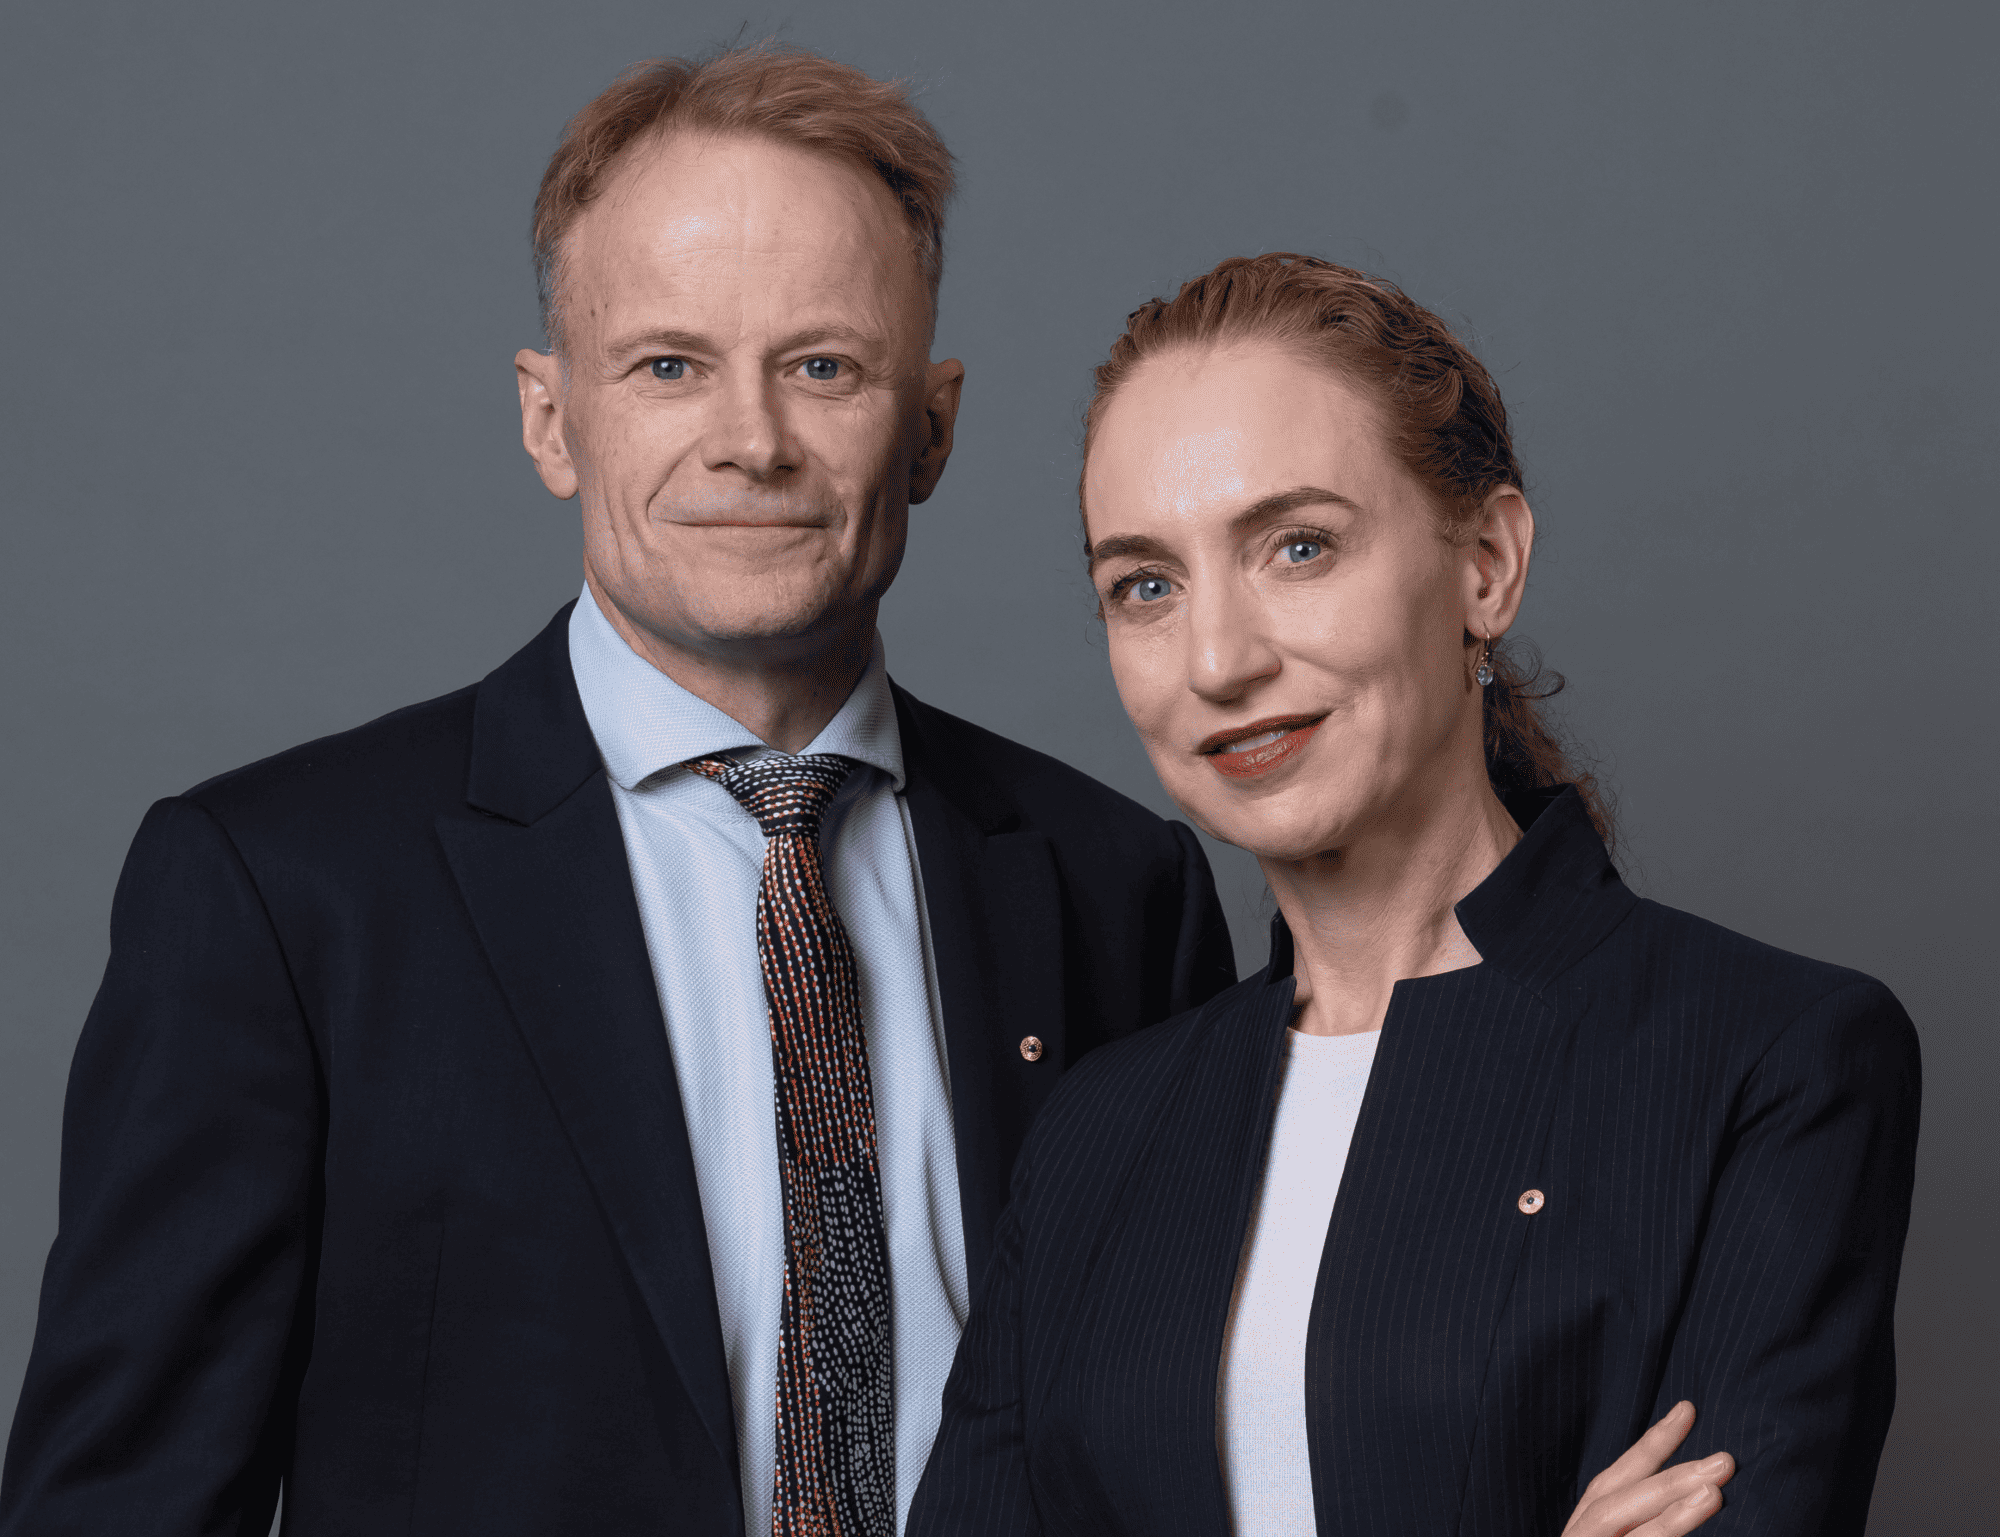 AMA (NSW) congratulates members Professors Long and Scolyer on being named Australians of the Year